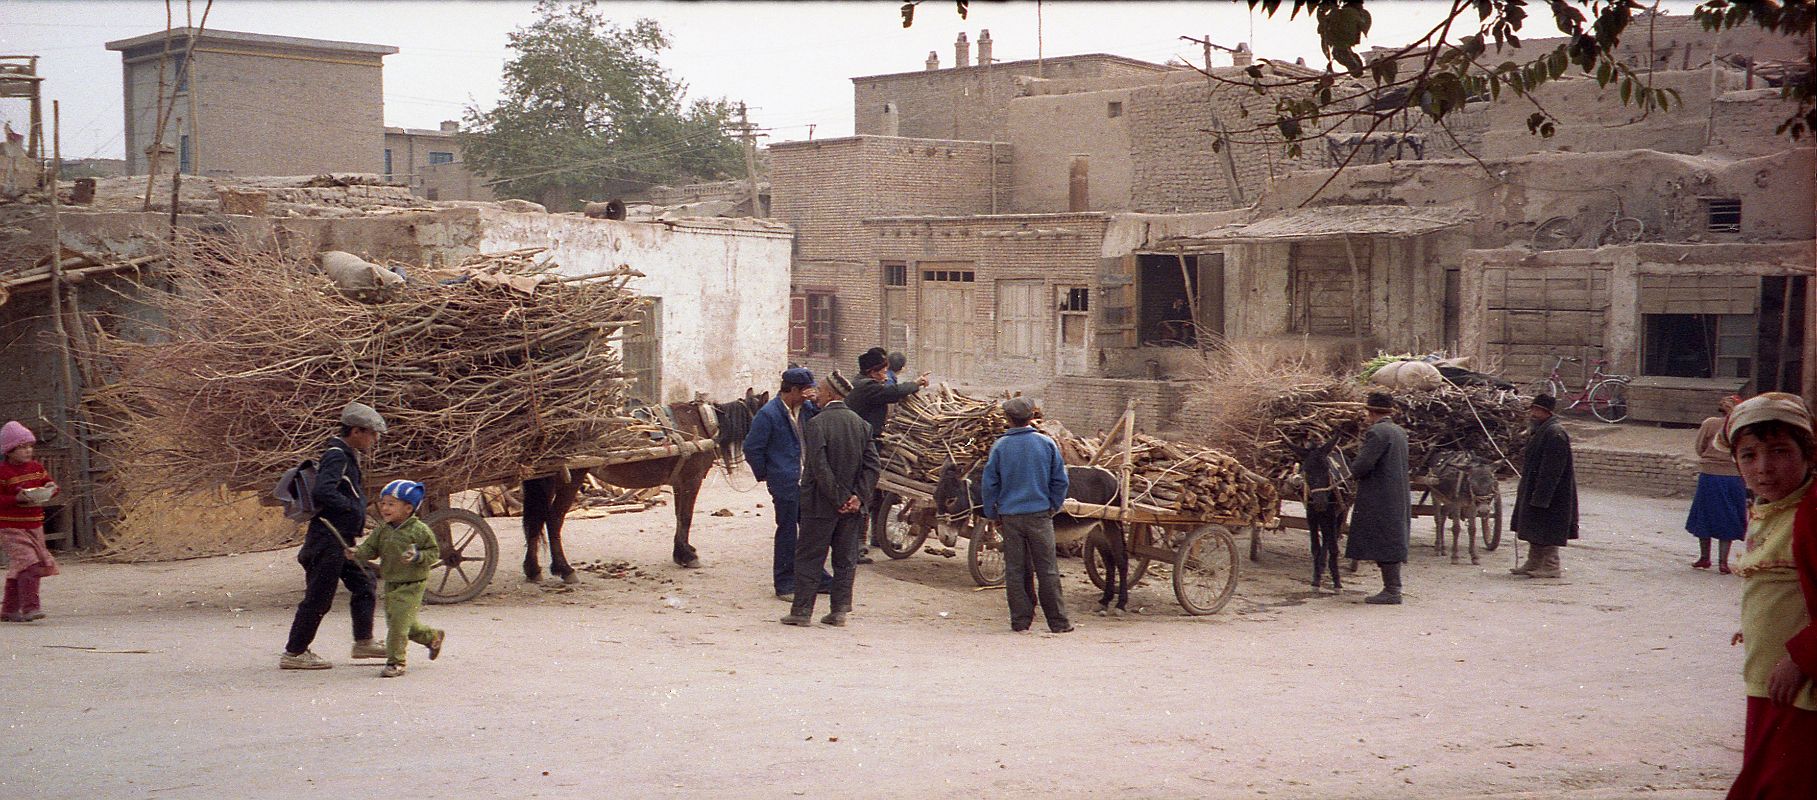 11 Kashgar Old City Street Scene 1993 Donkey Carts Being Loaded With Wood